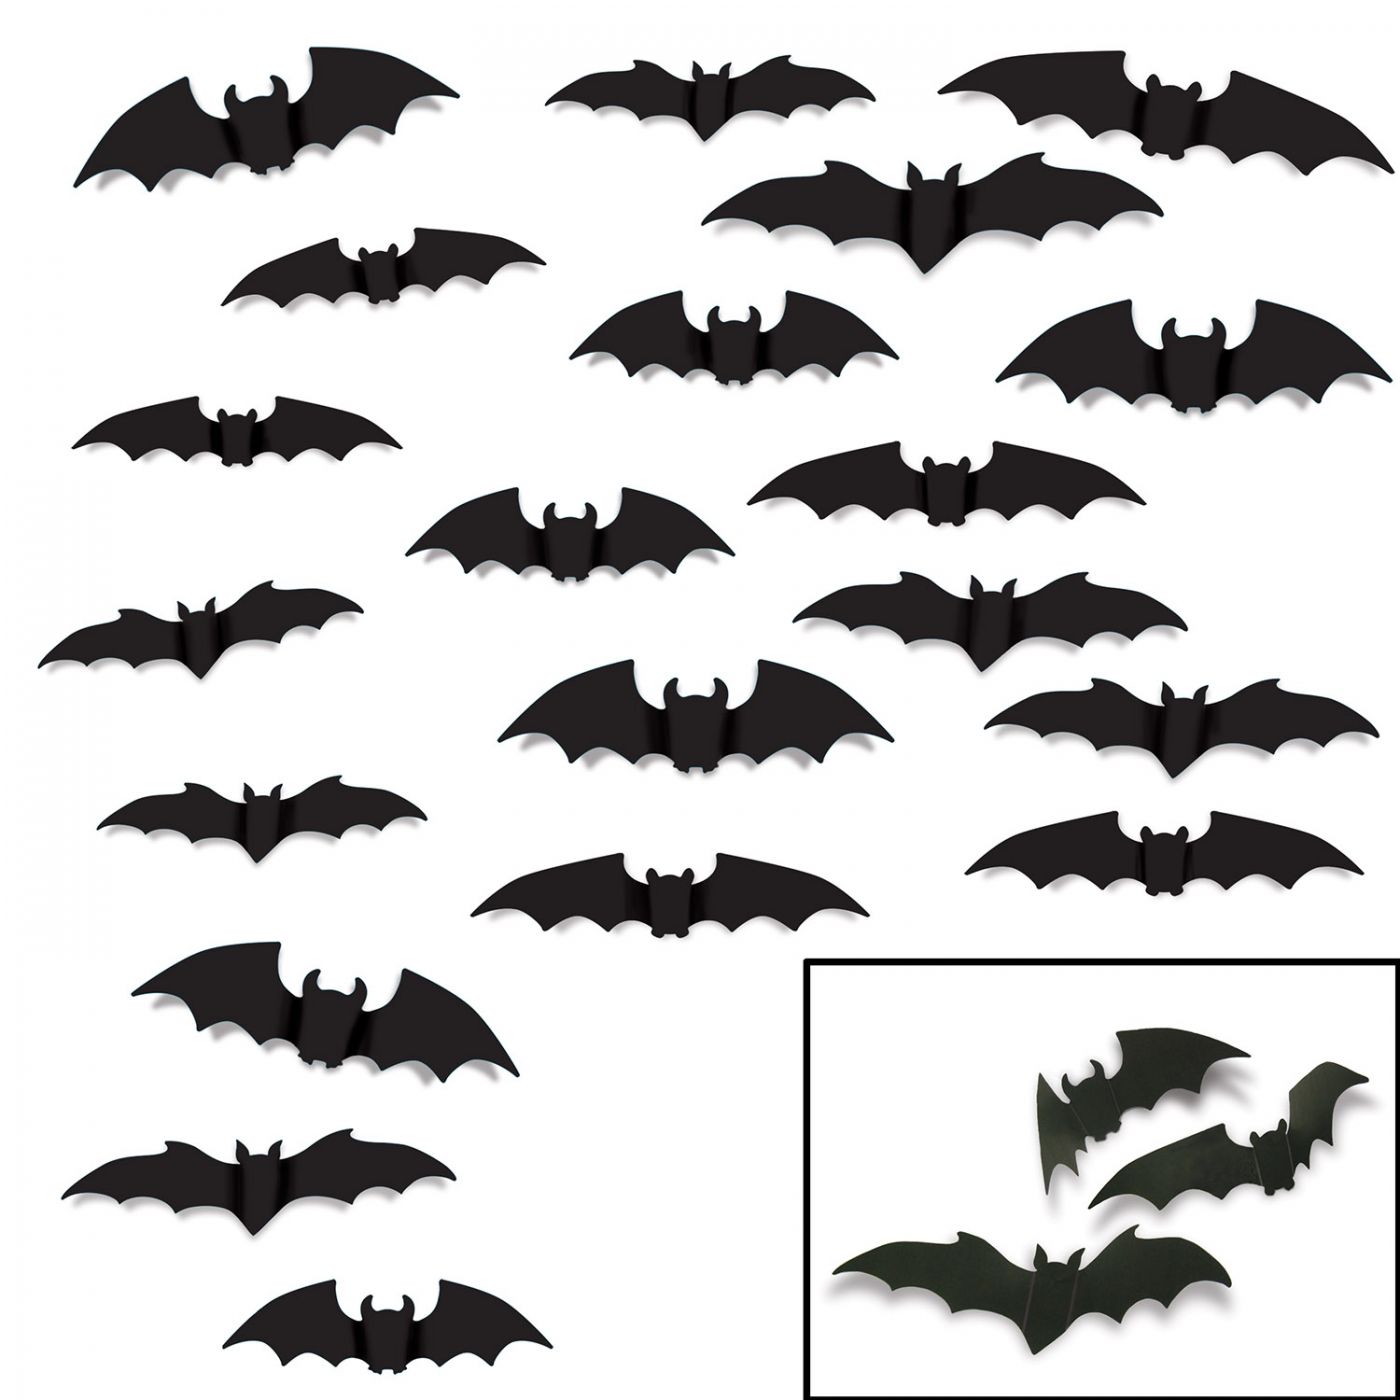 Image of Bat Silhouettes (12)